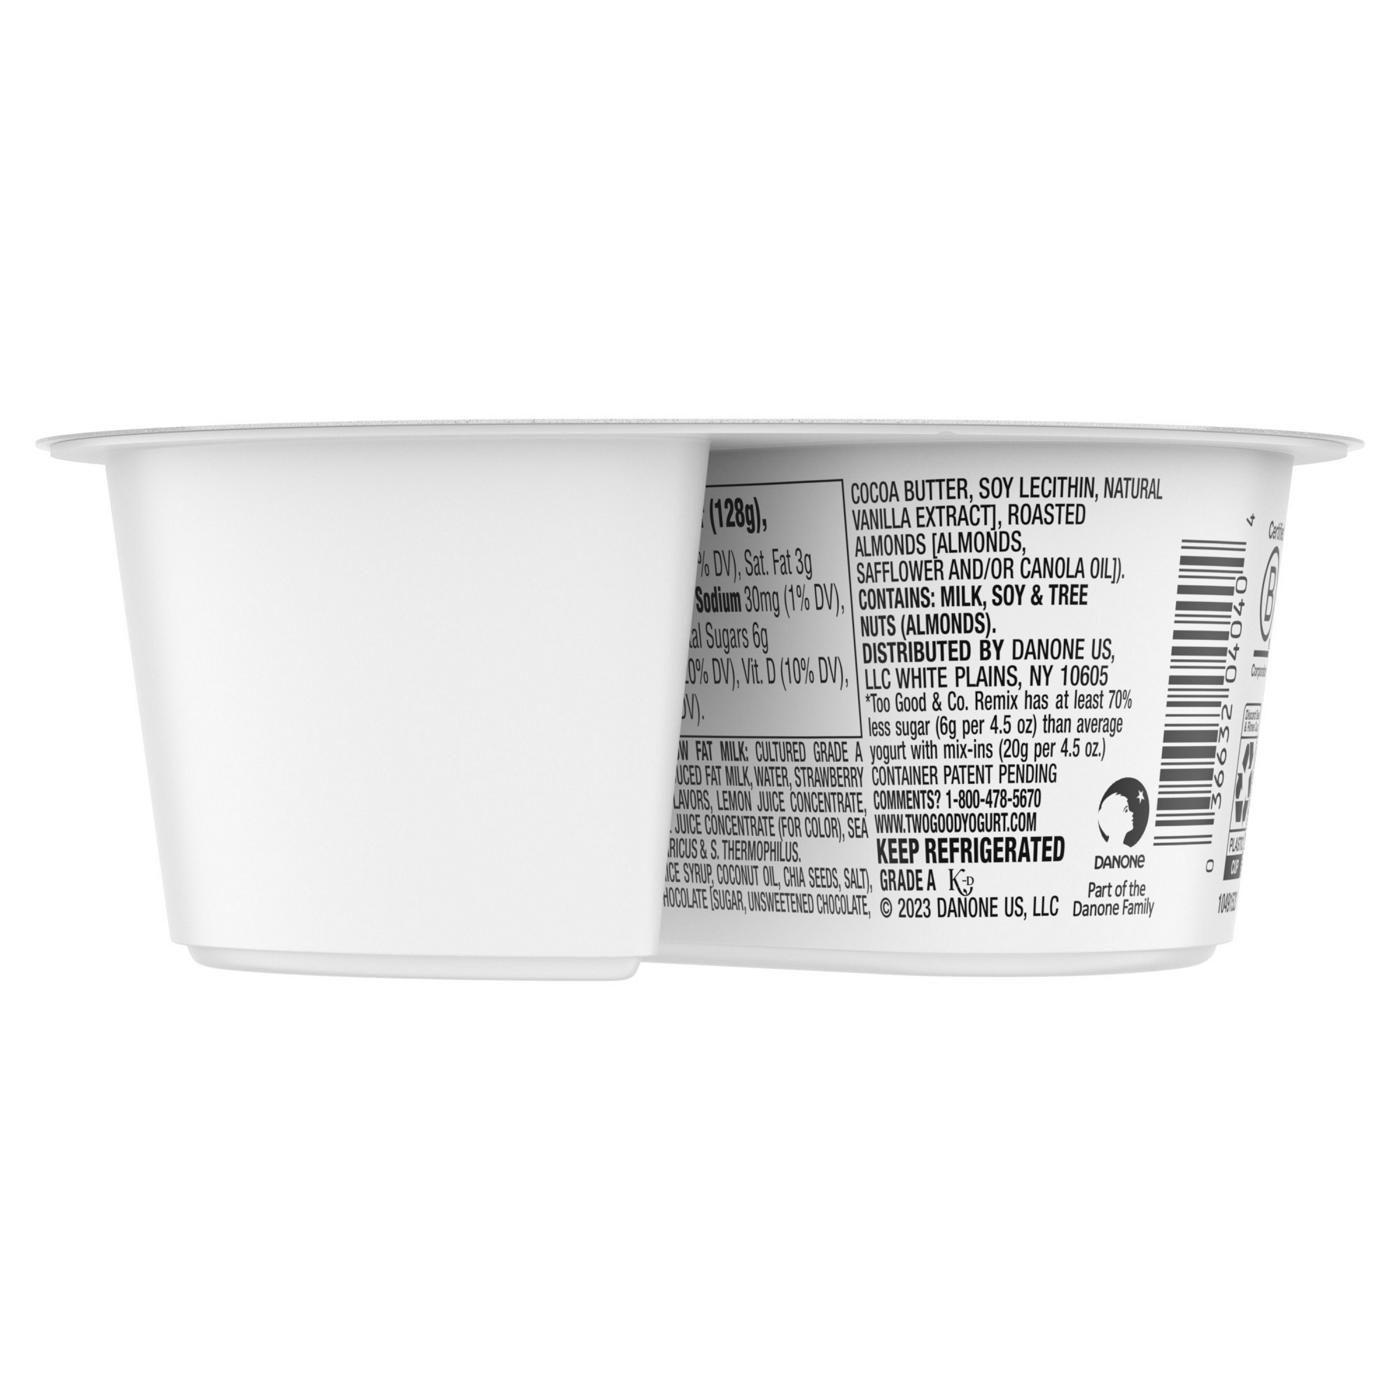 Too Good & Co. Remix Strawberry Flavored Low Fat Greek Yogurt-Cultured Ultra-Filtered Low; image 9 of 9